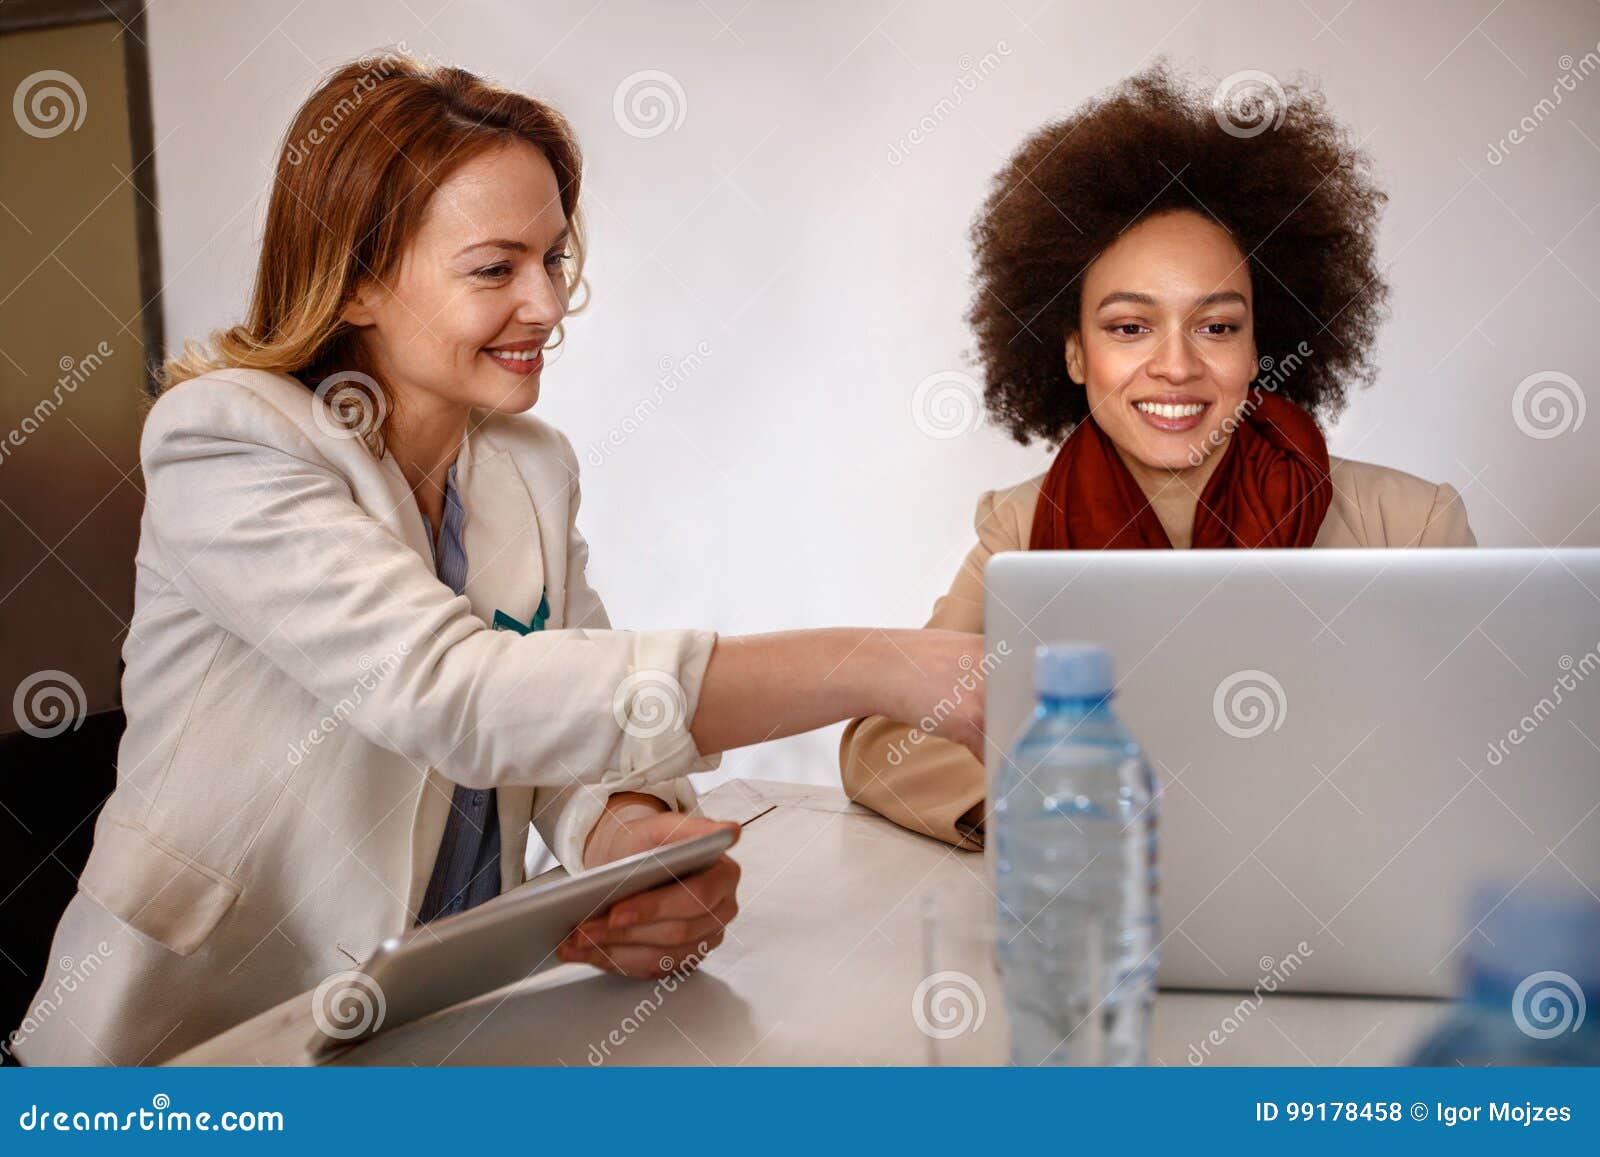 manager with employee make consultation about business on laptop